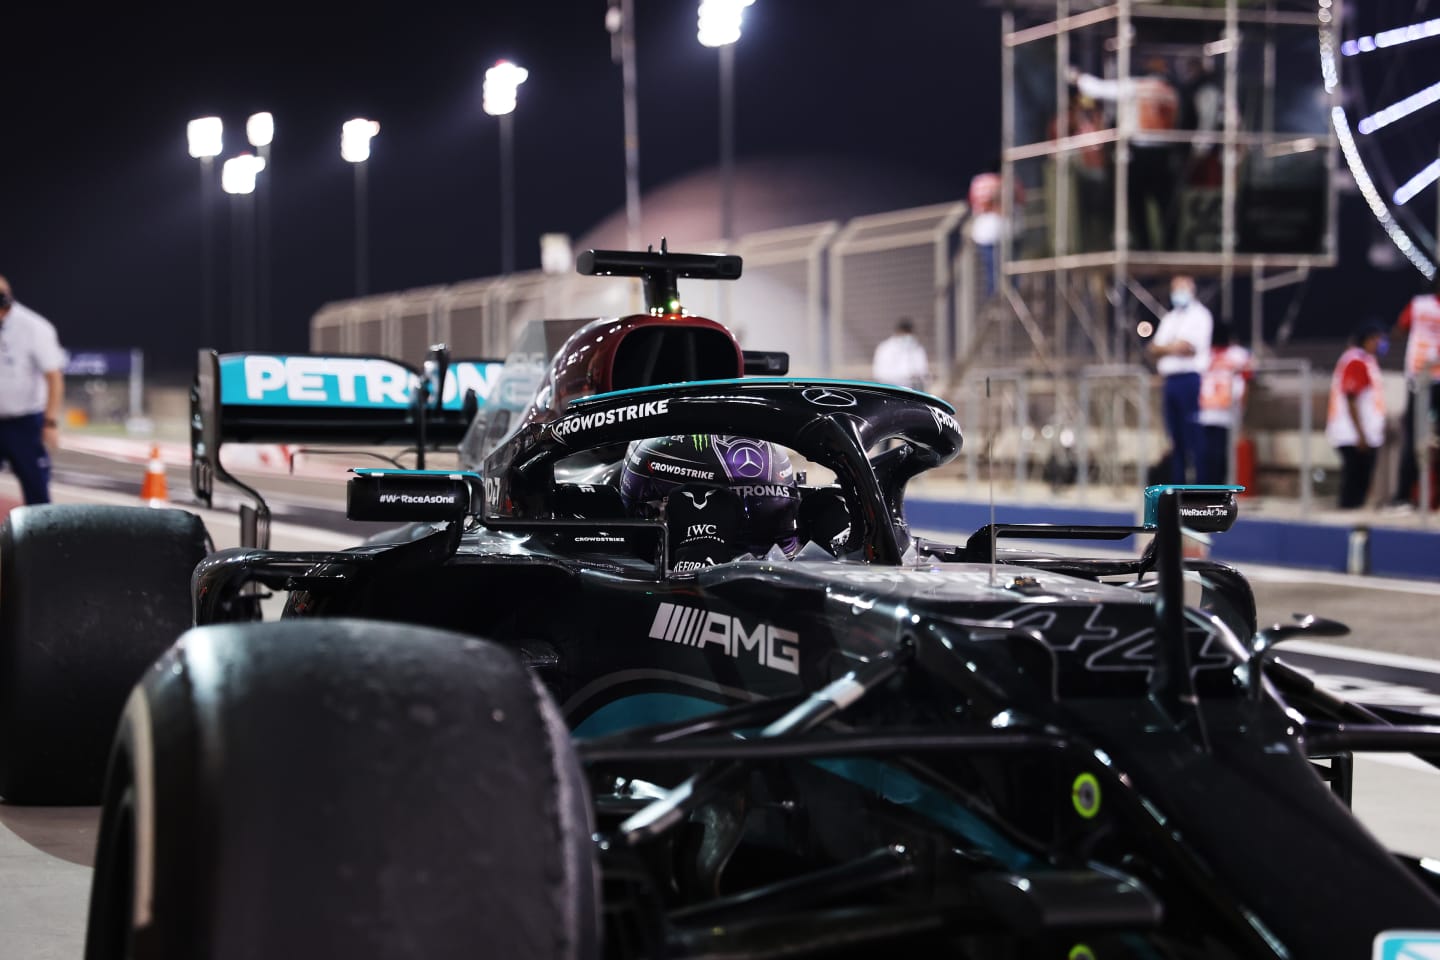 BAHRAIN, BAHRAIN - MARCH 28: Race Winner, Lewis Hamilton of Great Britain and Mercedes GP stops in parc ferme during the F1 Grand Prix of Bahrain at Bahrain International Circuit on March 28, 2021 in Bahrain, Bahrain. (Photo by Lars Baron/Getty Images)